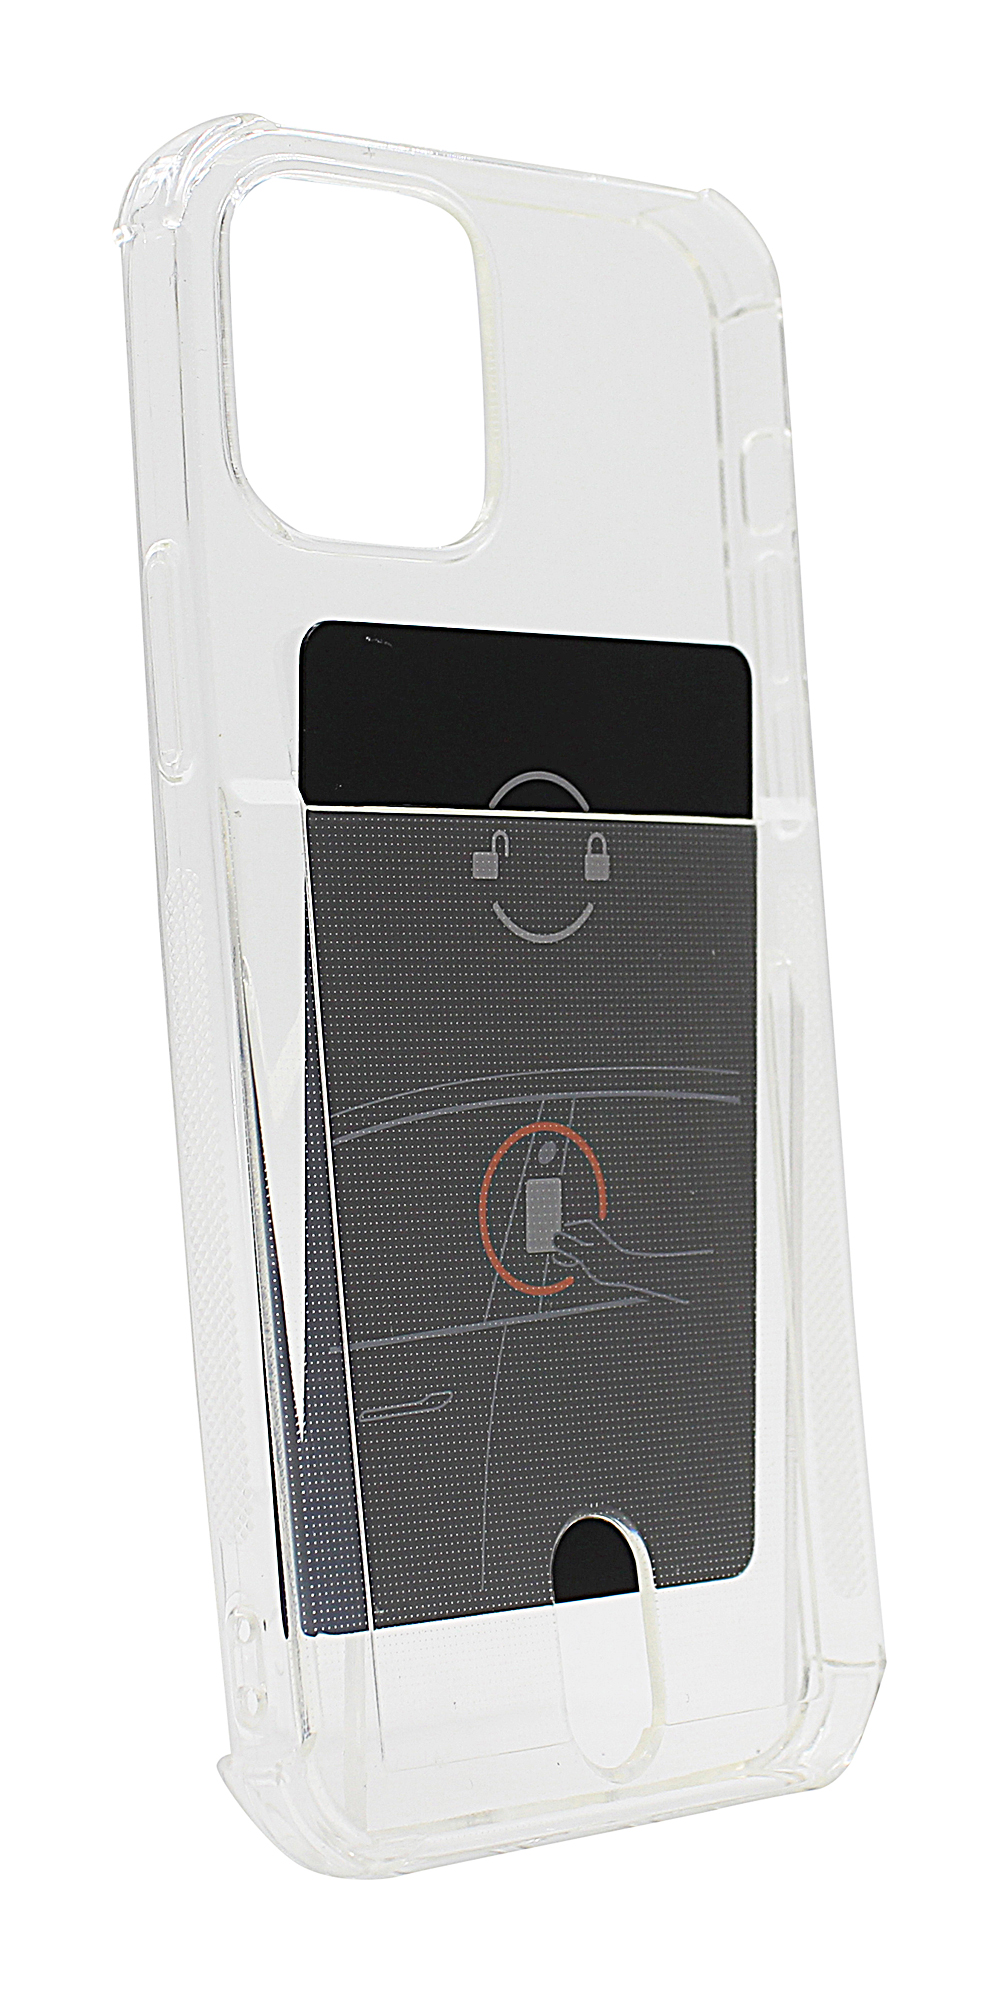 TPU Cover med kortlomme iPhone 12 Pro (6.1)